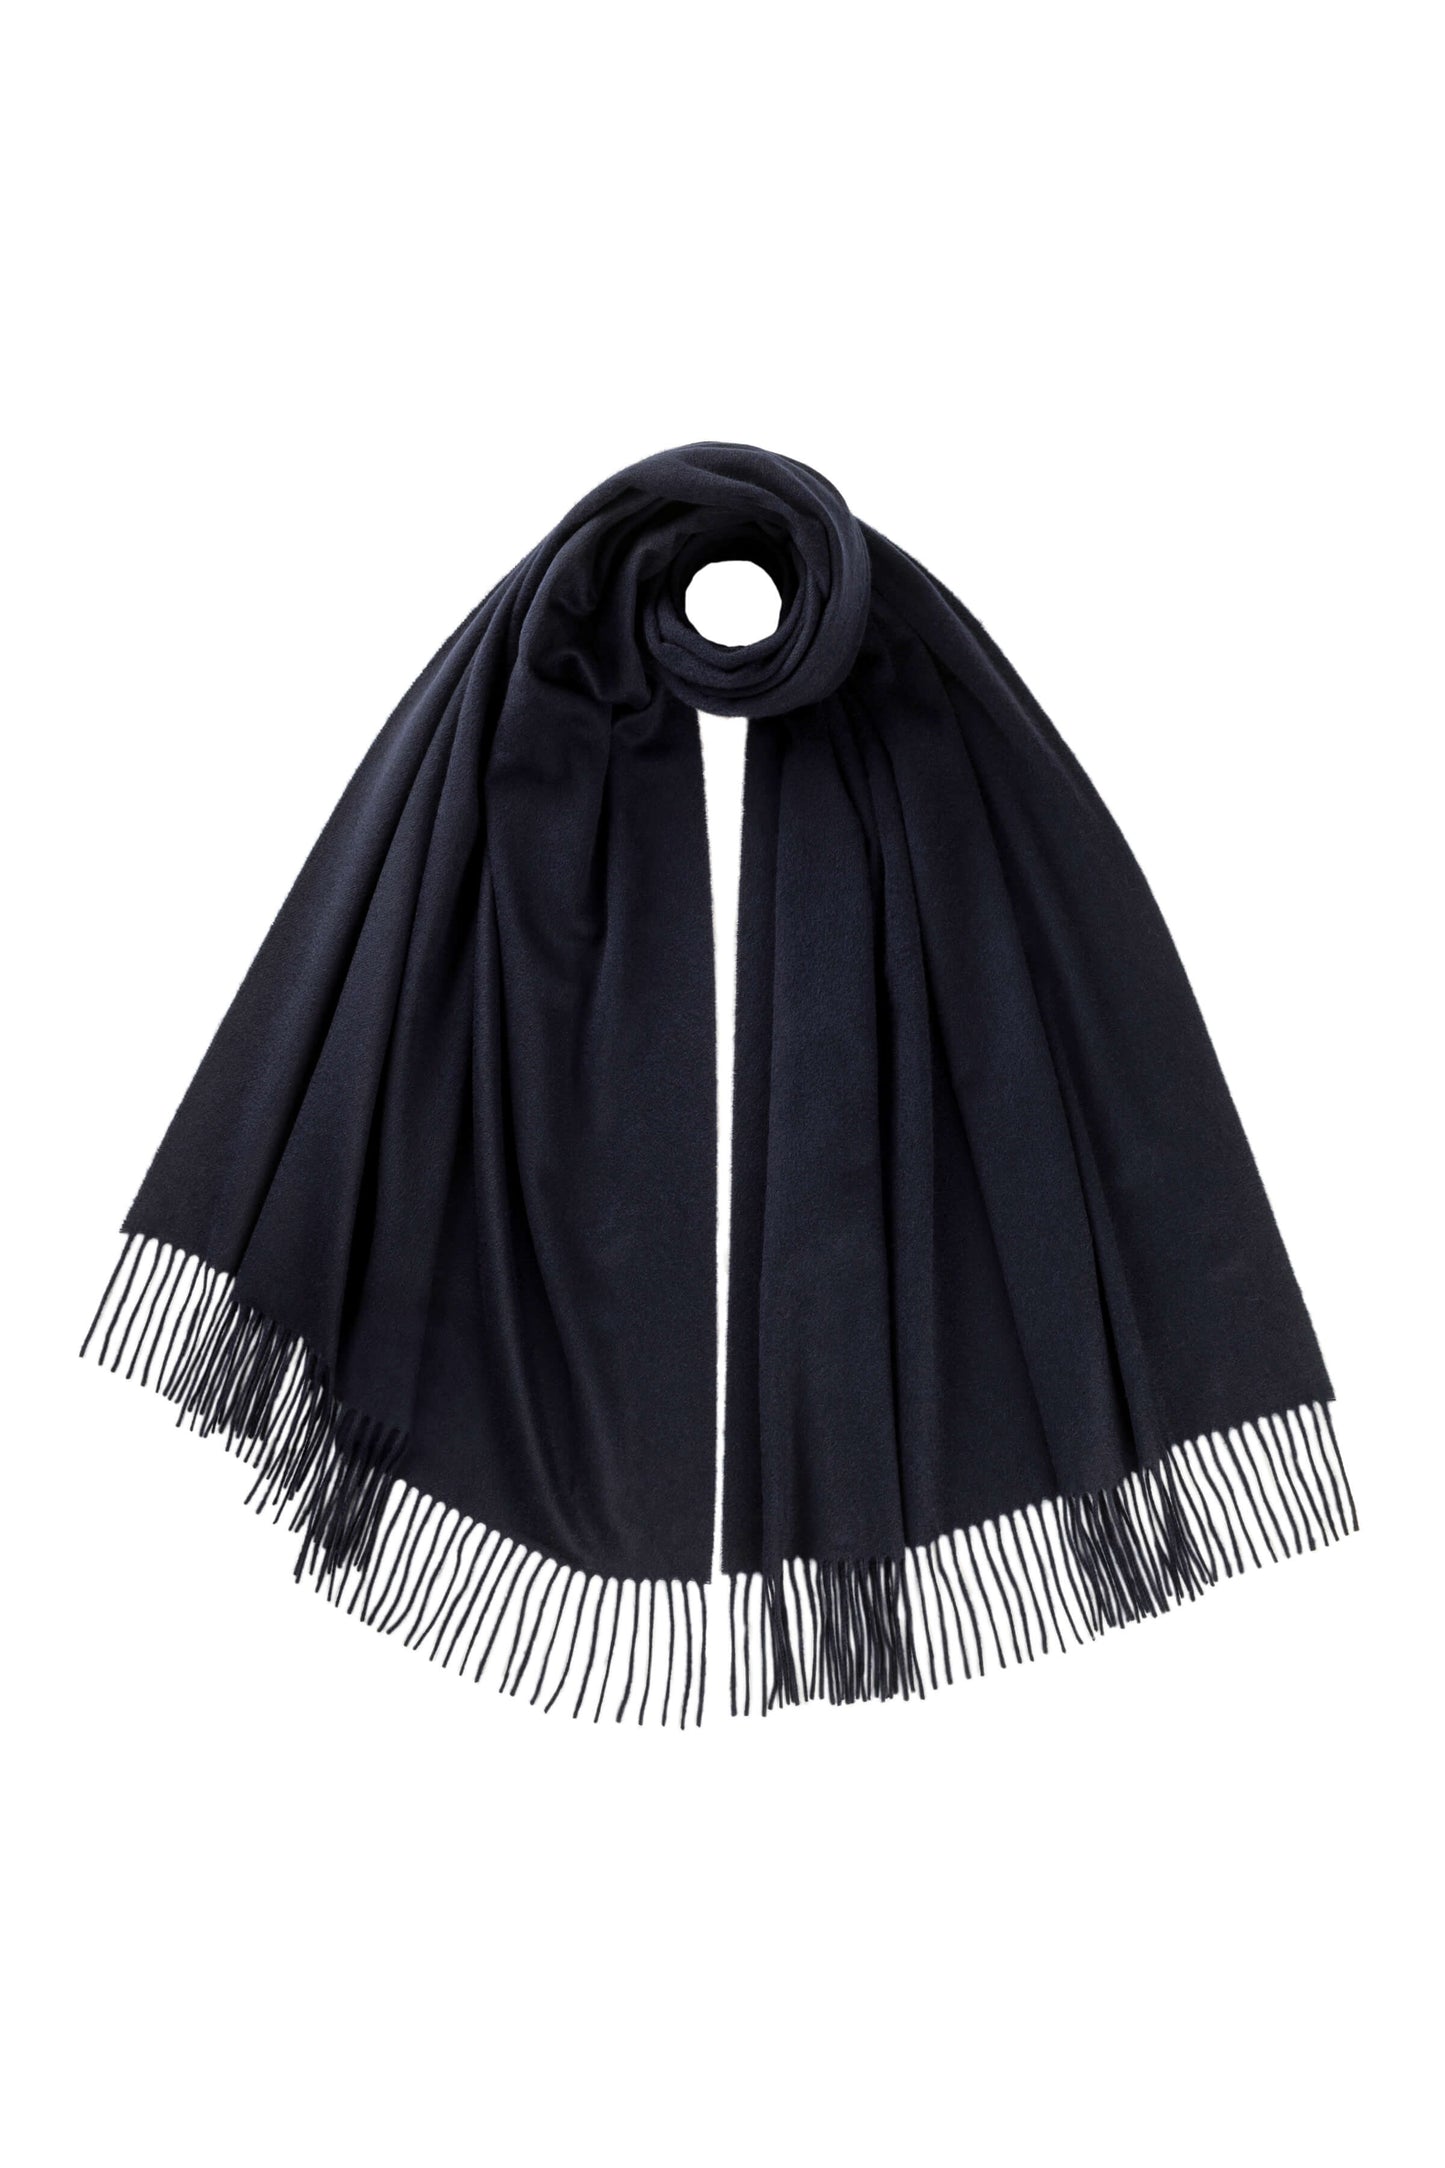 Johnstons of Elgin 100% Cashmere Stole in Dark Navy on a white background WA000056SD7330N/A